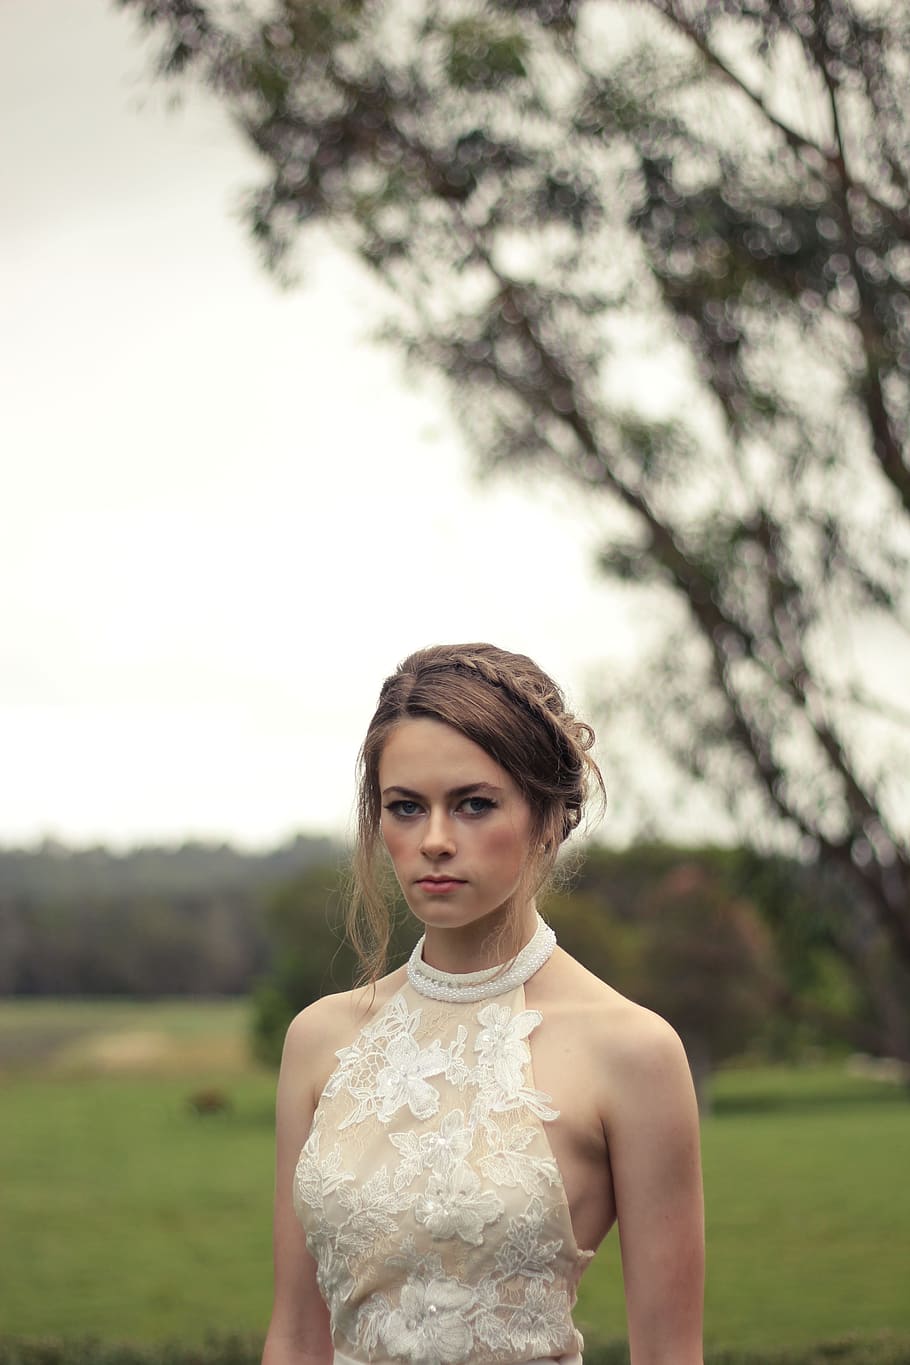 woman, white, lace halter, top, daytime, bride, portrait, young, female, girl